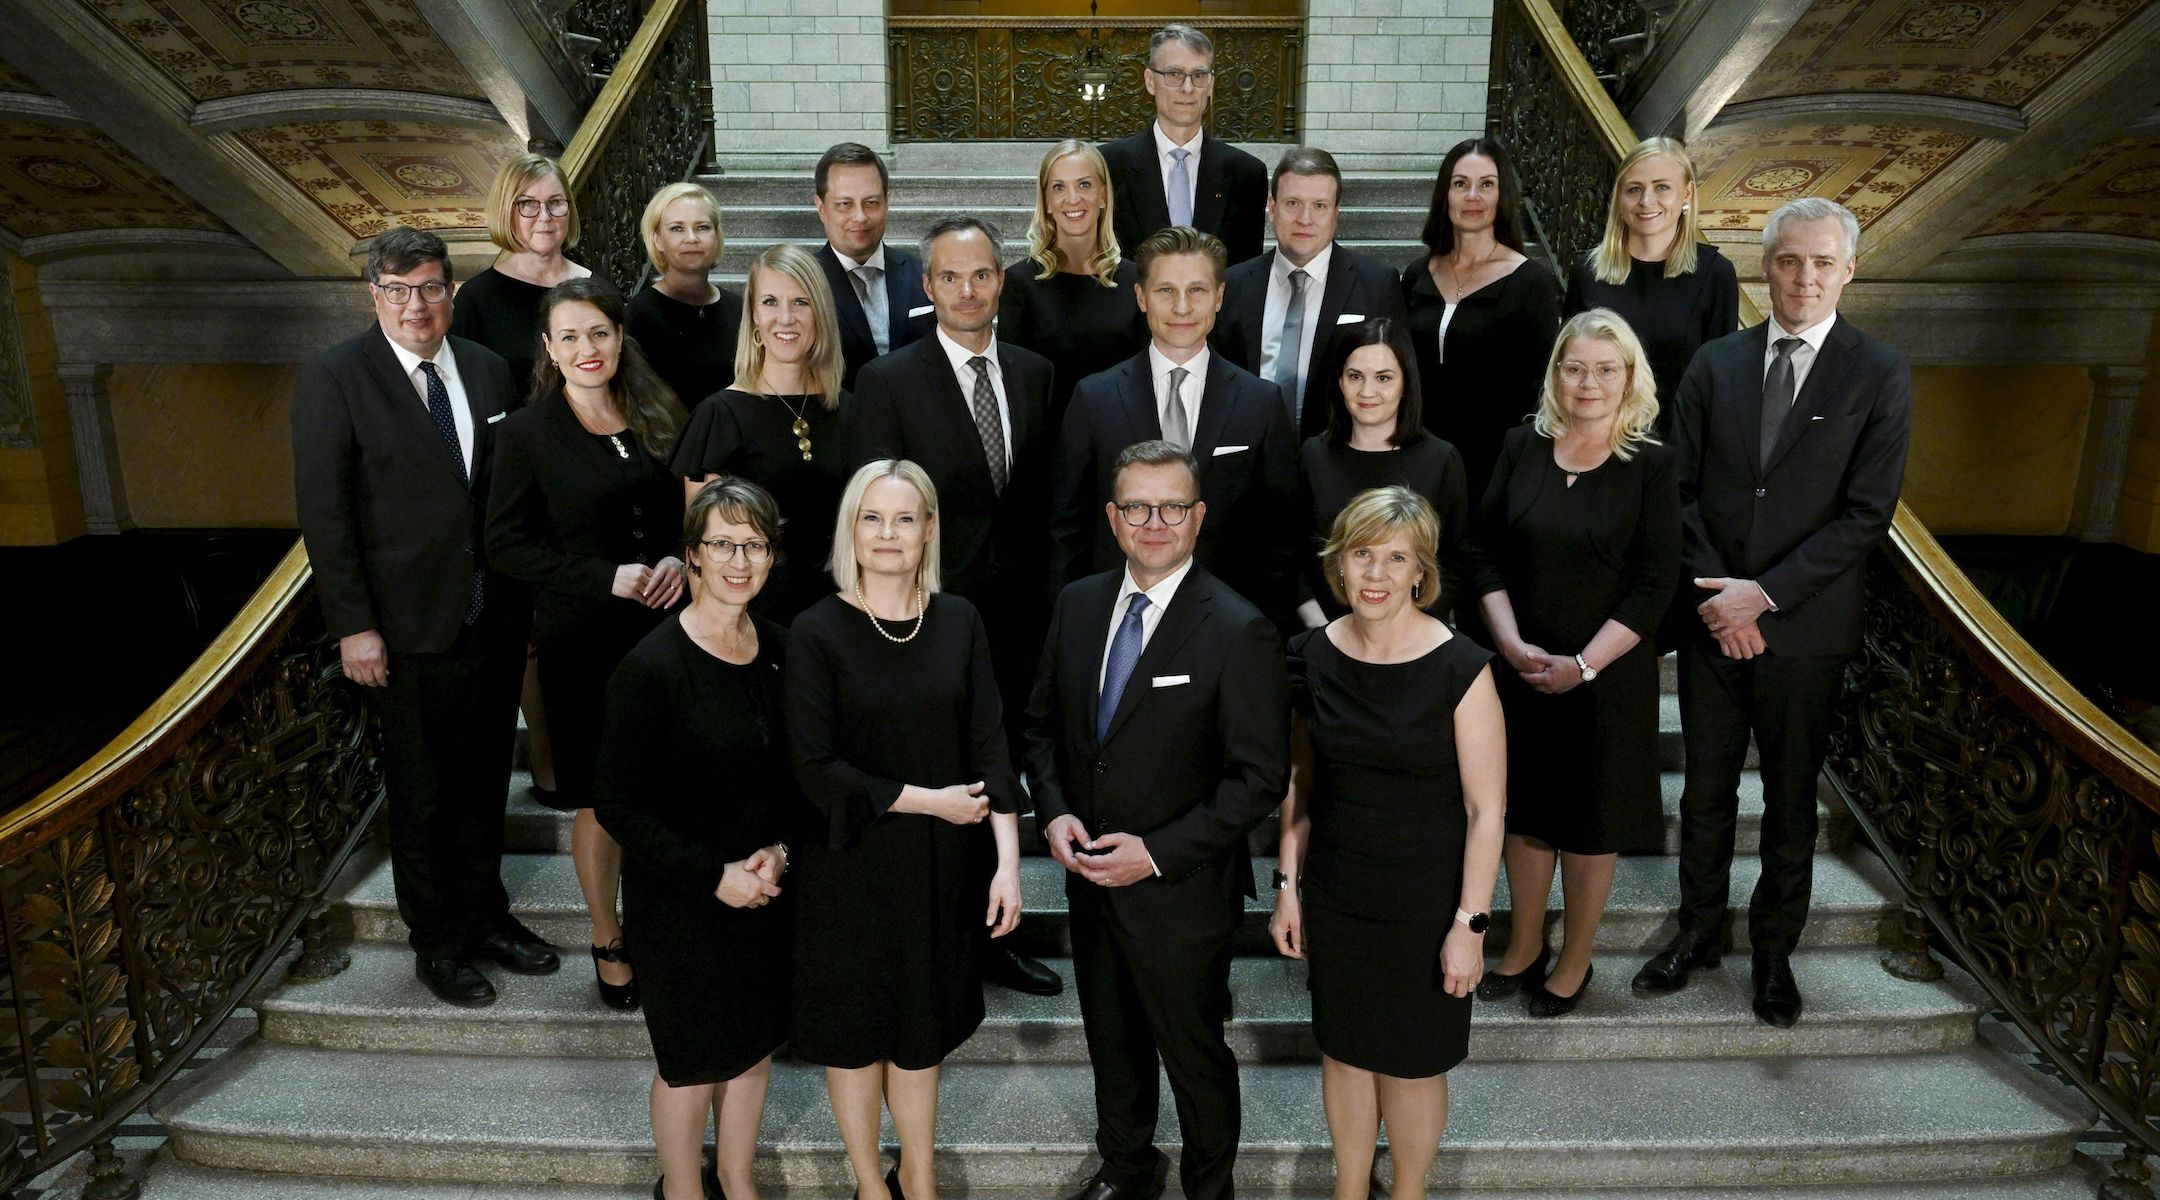 The new government of Finland led by Prime Minister Petteri Orpo (front row center) poses for a family photo in Helsinki, Finland, June 20, 2023. Former minister of economic affairs Vilhelm Junnila (third row, third from left) resigned after 10 days on the job over Nazi jokes he made in 2019. (Antti Aimo-Koivisto / Lehtikuva / AFP via Getty Images)